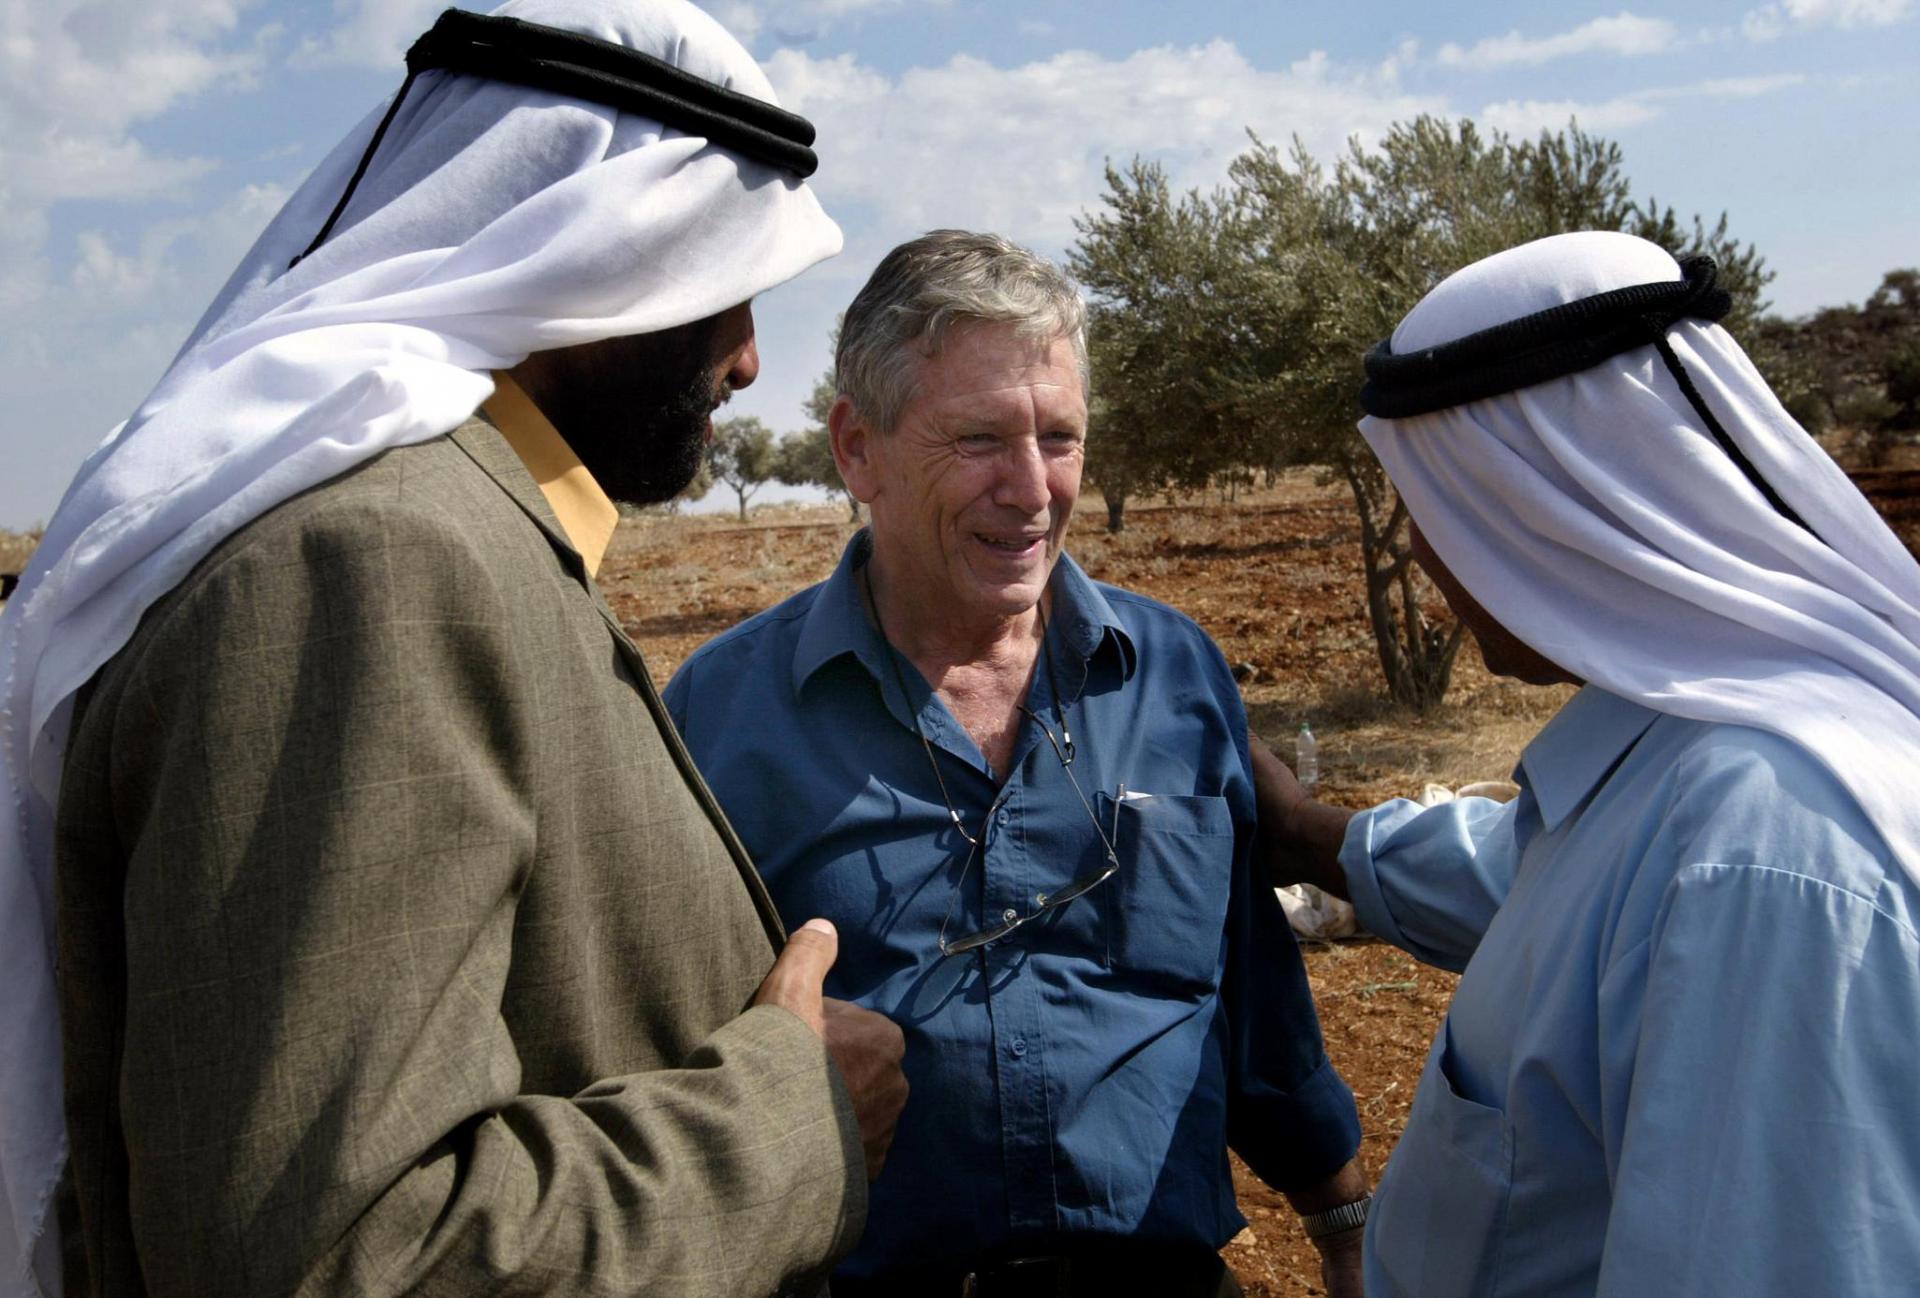 In this file photo taken on October 30, 2002 Israeli writer Amos Oz (C) talks with Palestinian men after picking olives in the West Bank village of Aqraba, south of Nablus.